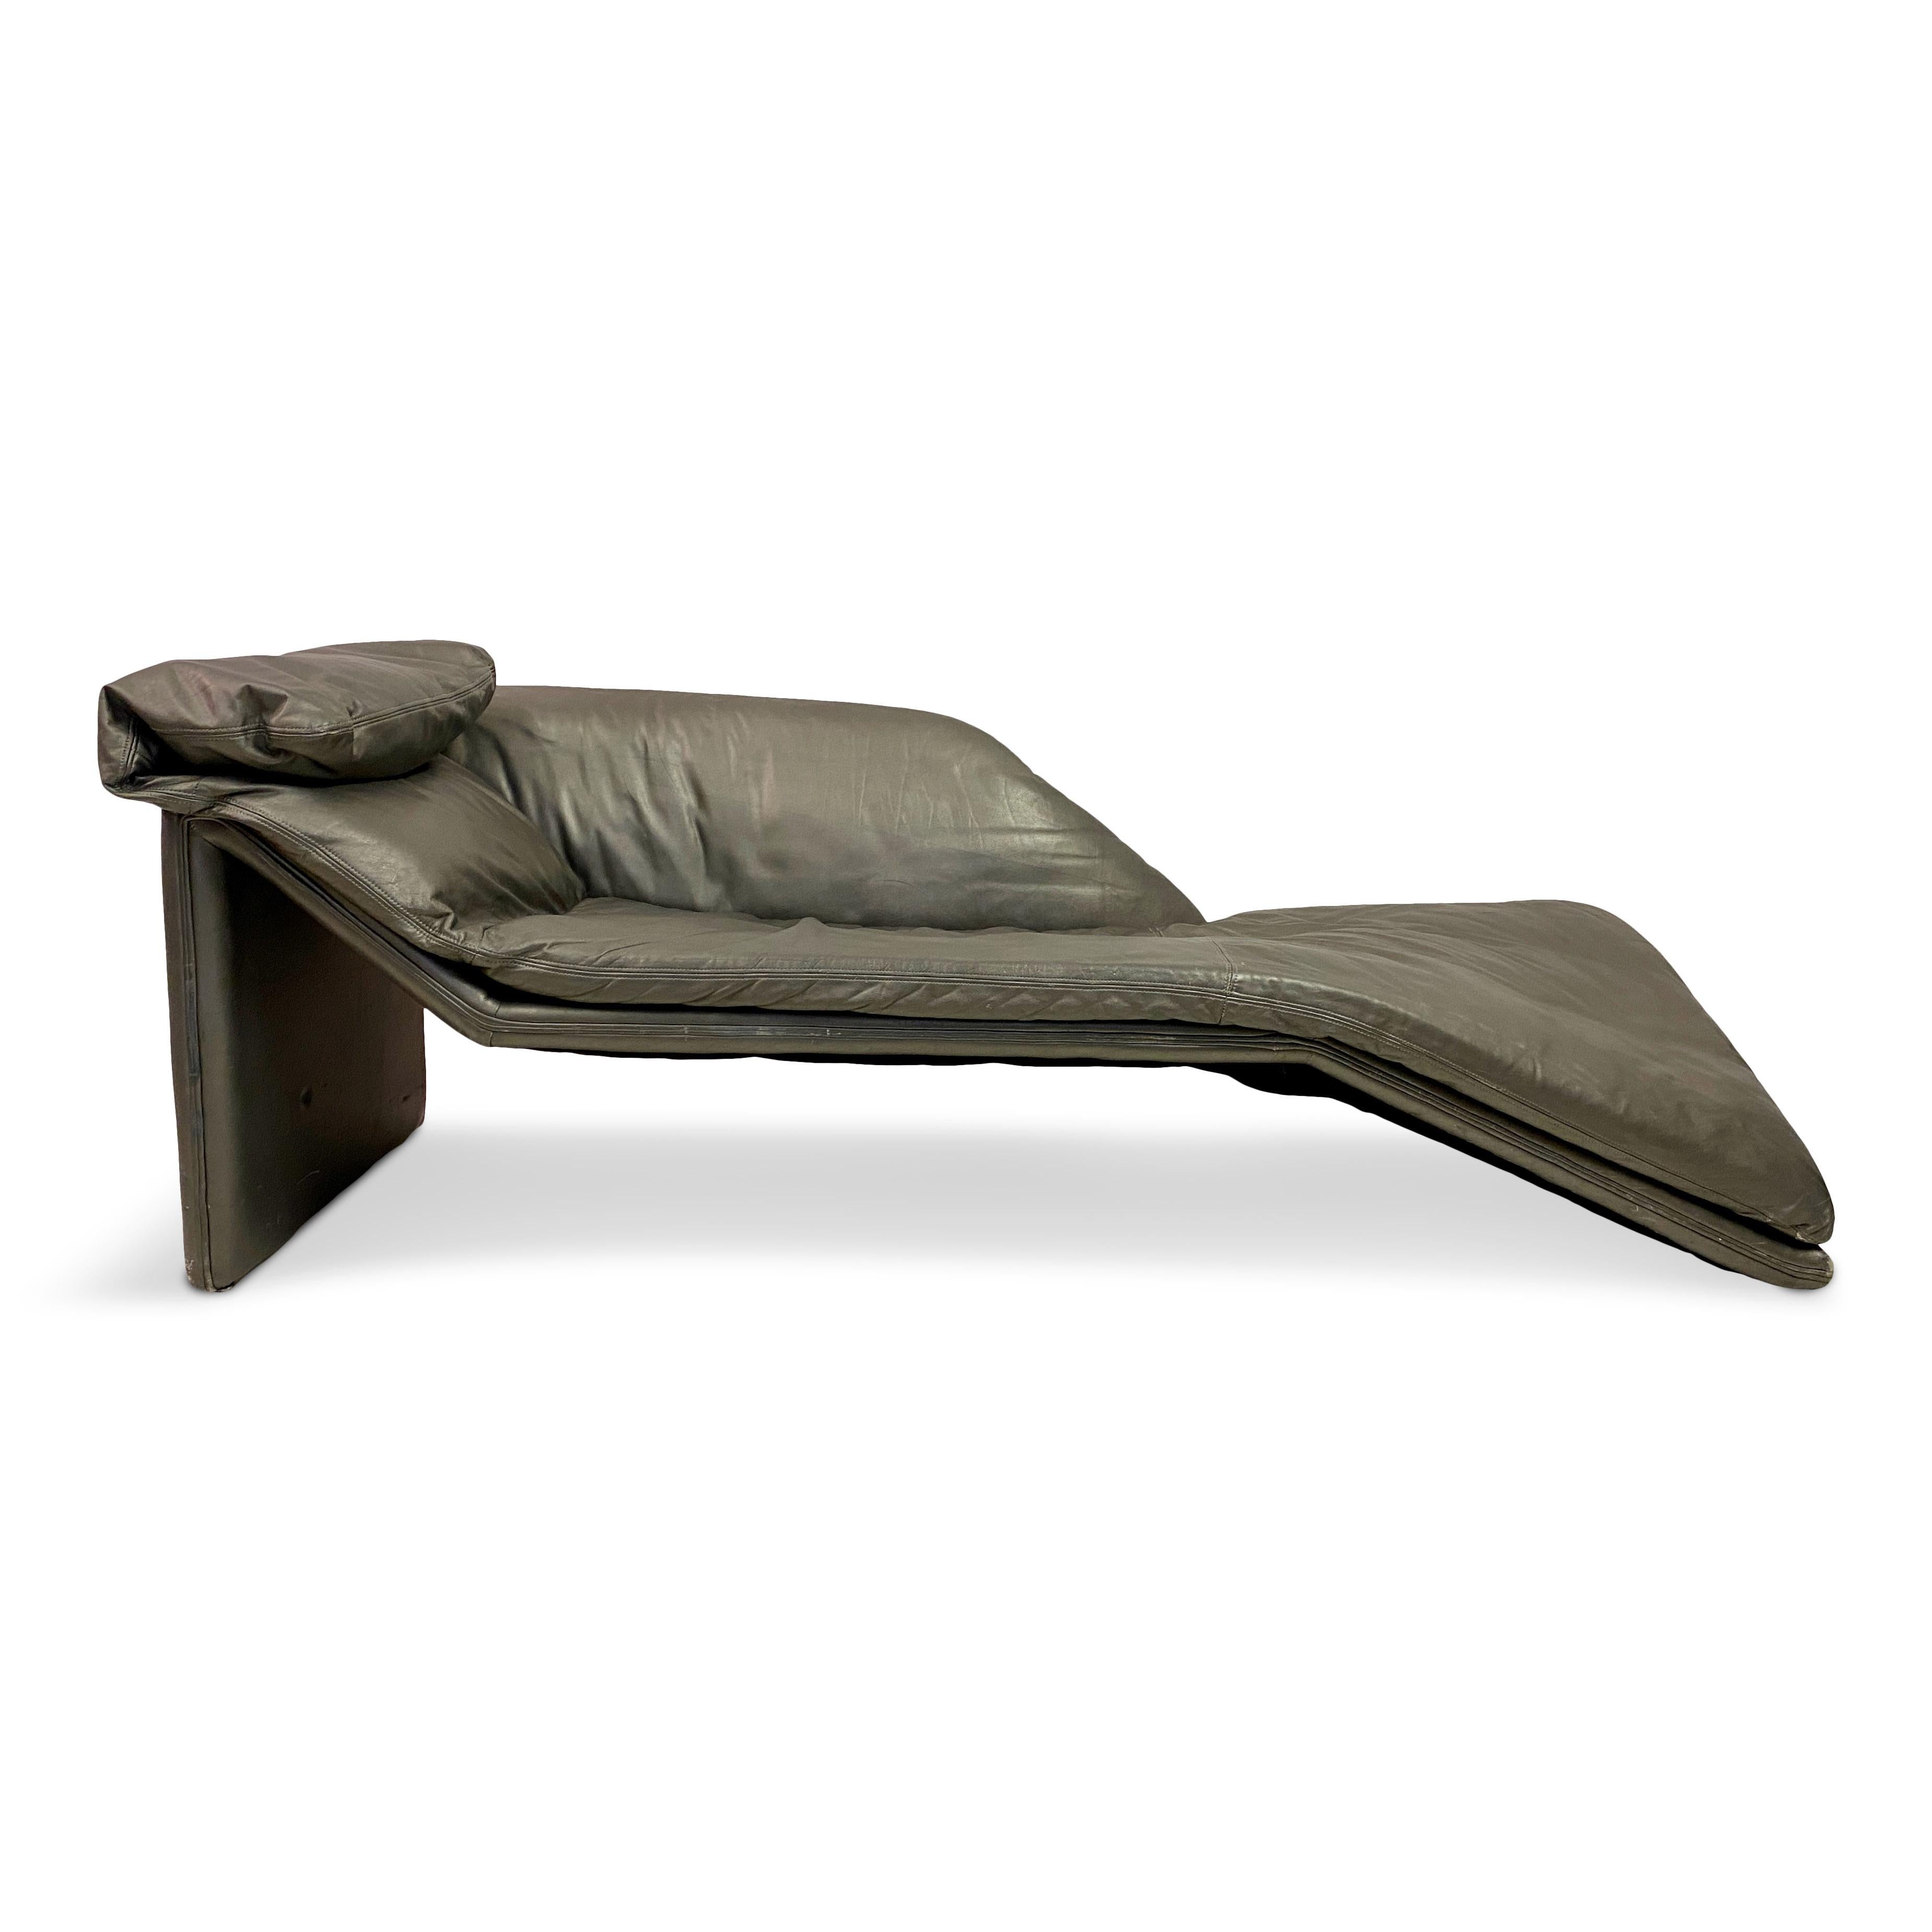 Daybed or chaise longue

By Jochen Flacke

For Etienne Aigner

Excellent quality leather described as pewter

Steel foot

Some small marks to the leather

1980s


